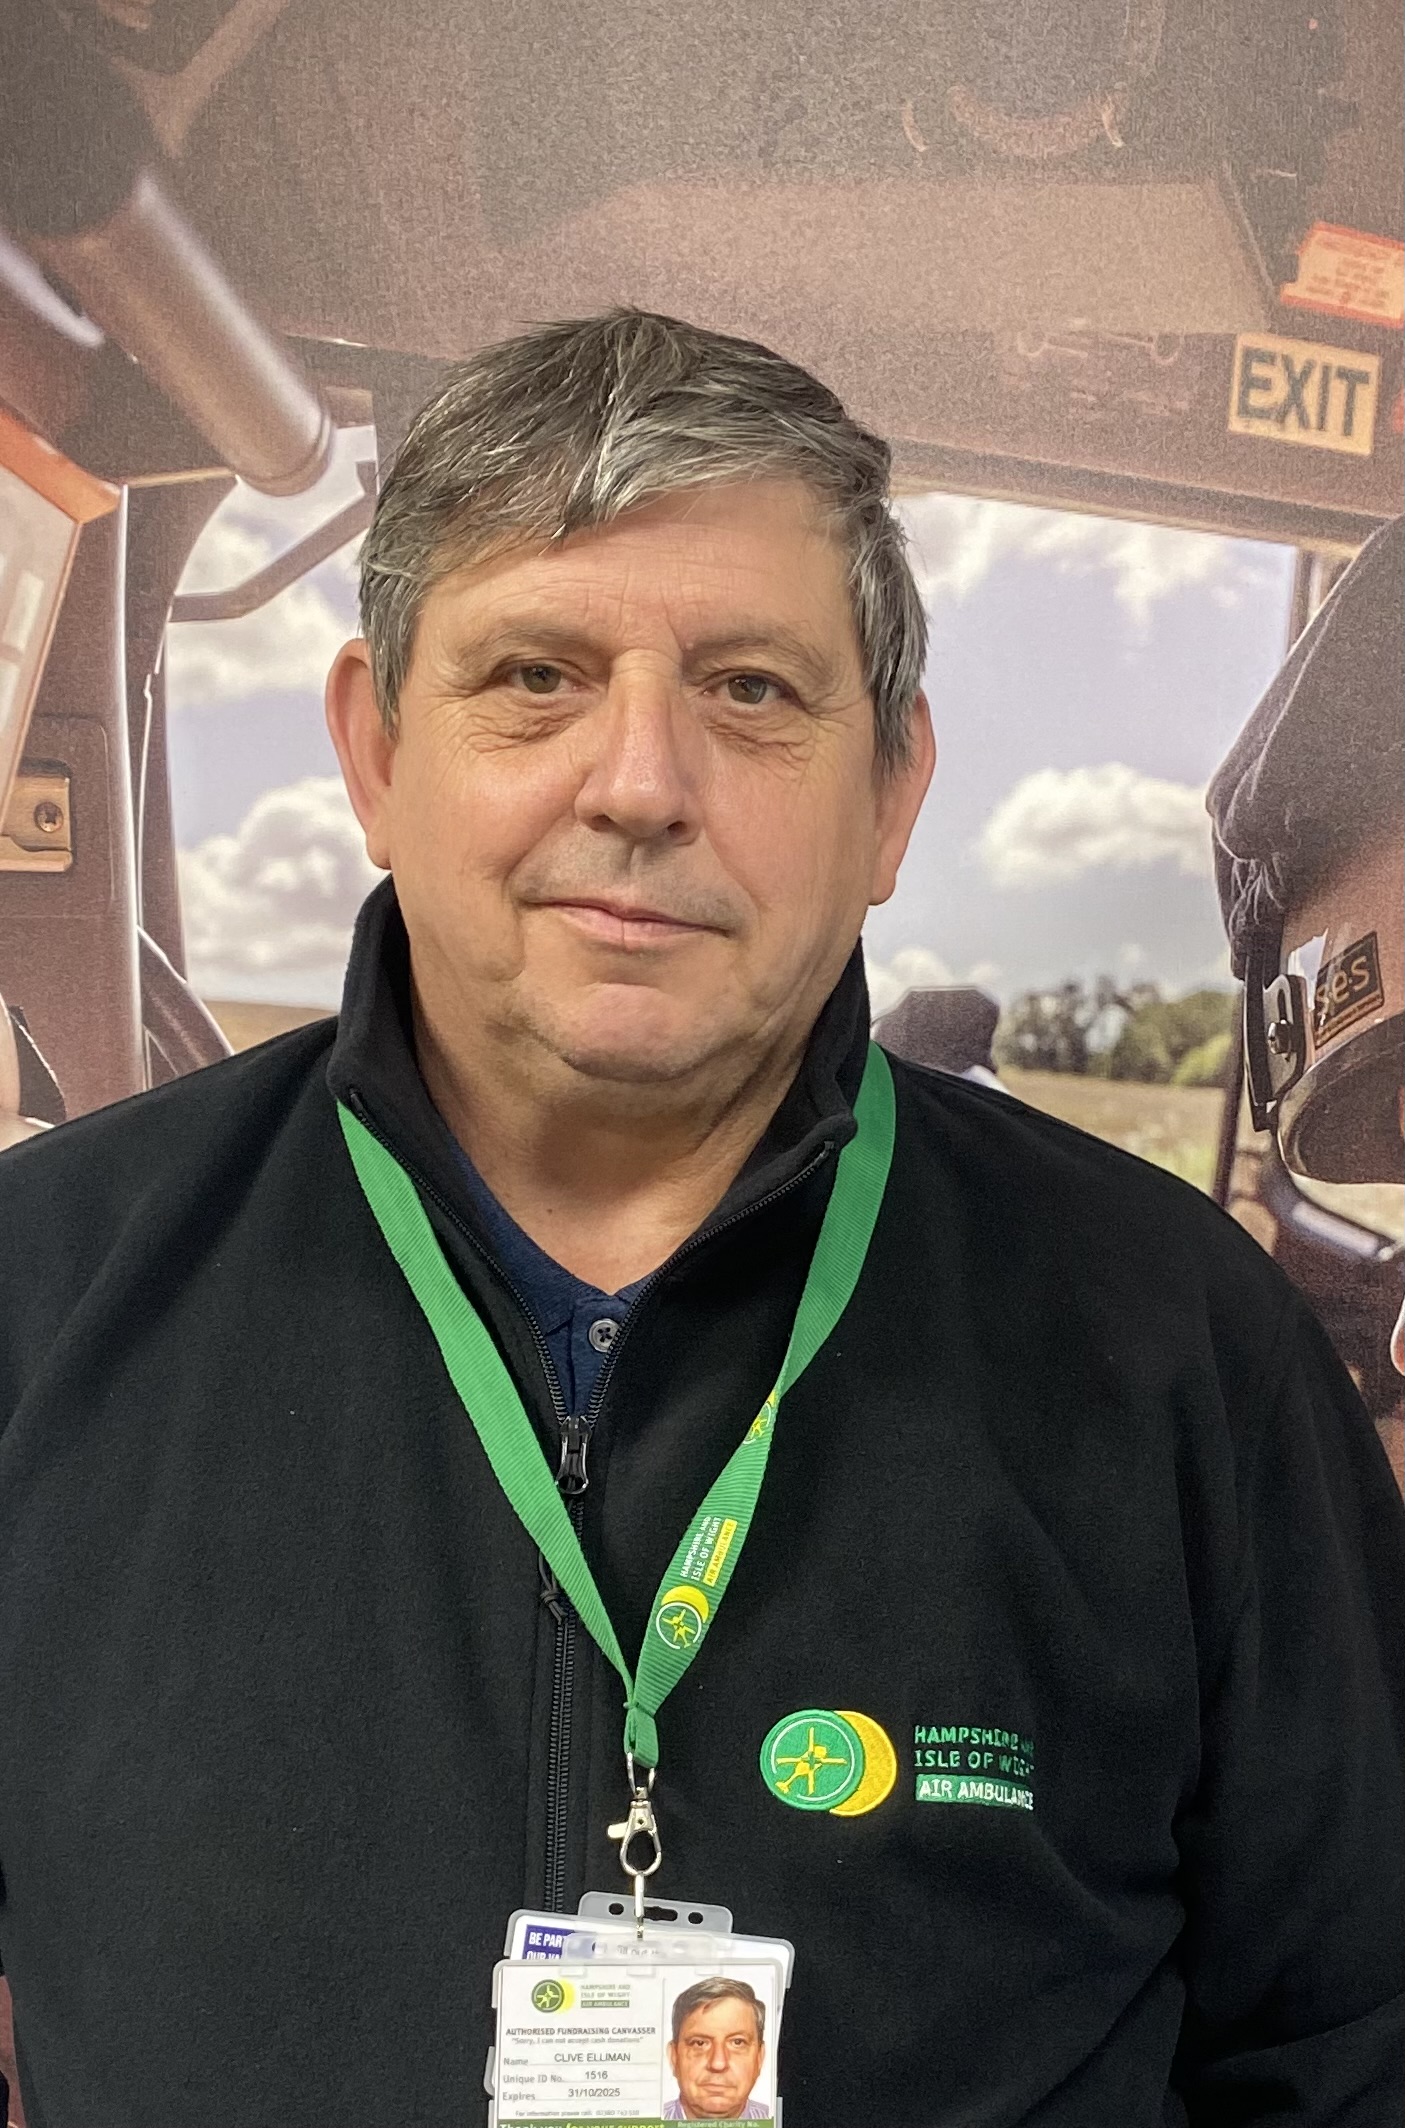 Clive is wearing a HIOWAA fleece and lanyard and standing in front of a large canvas photo of the crew